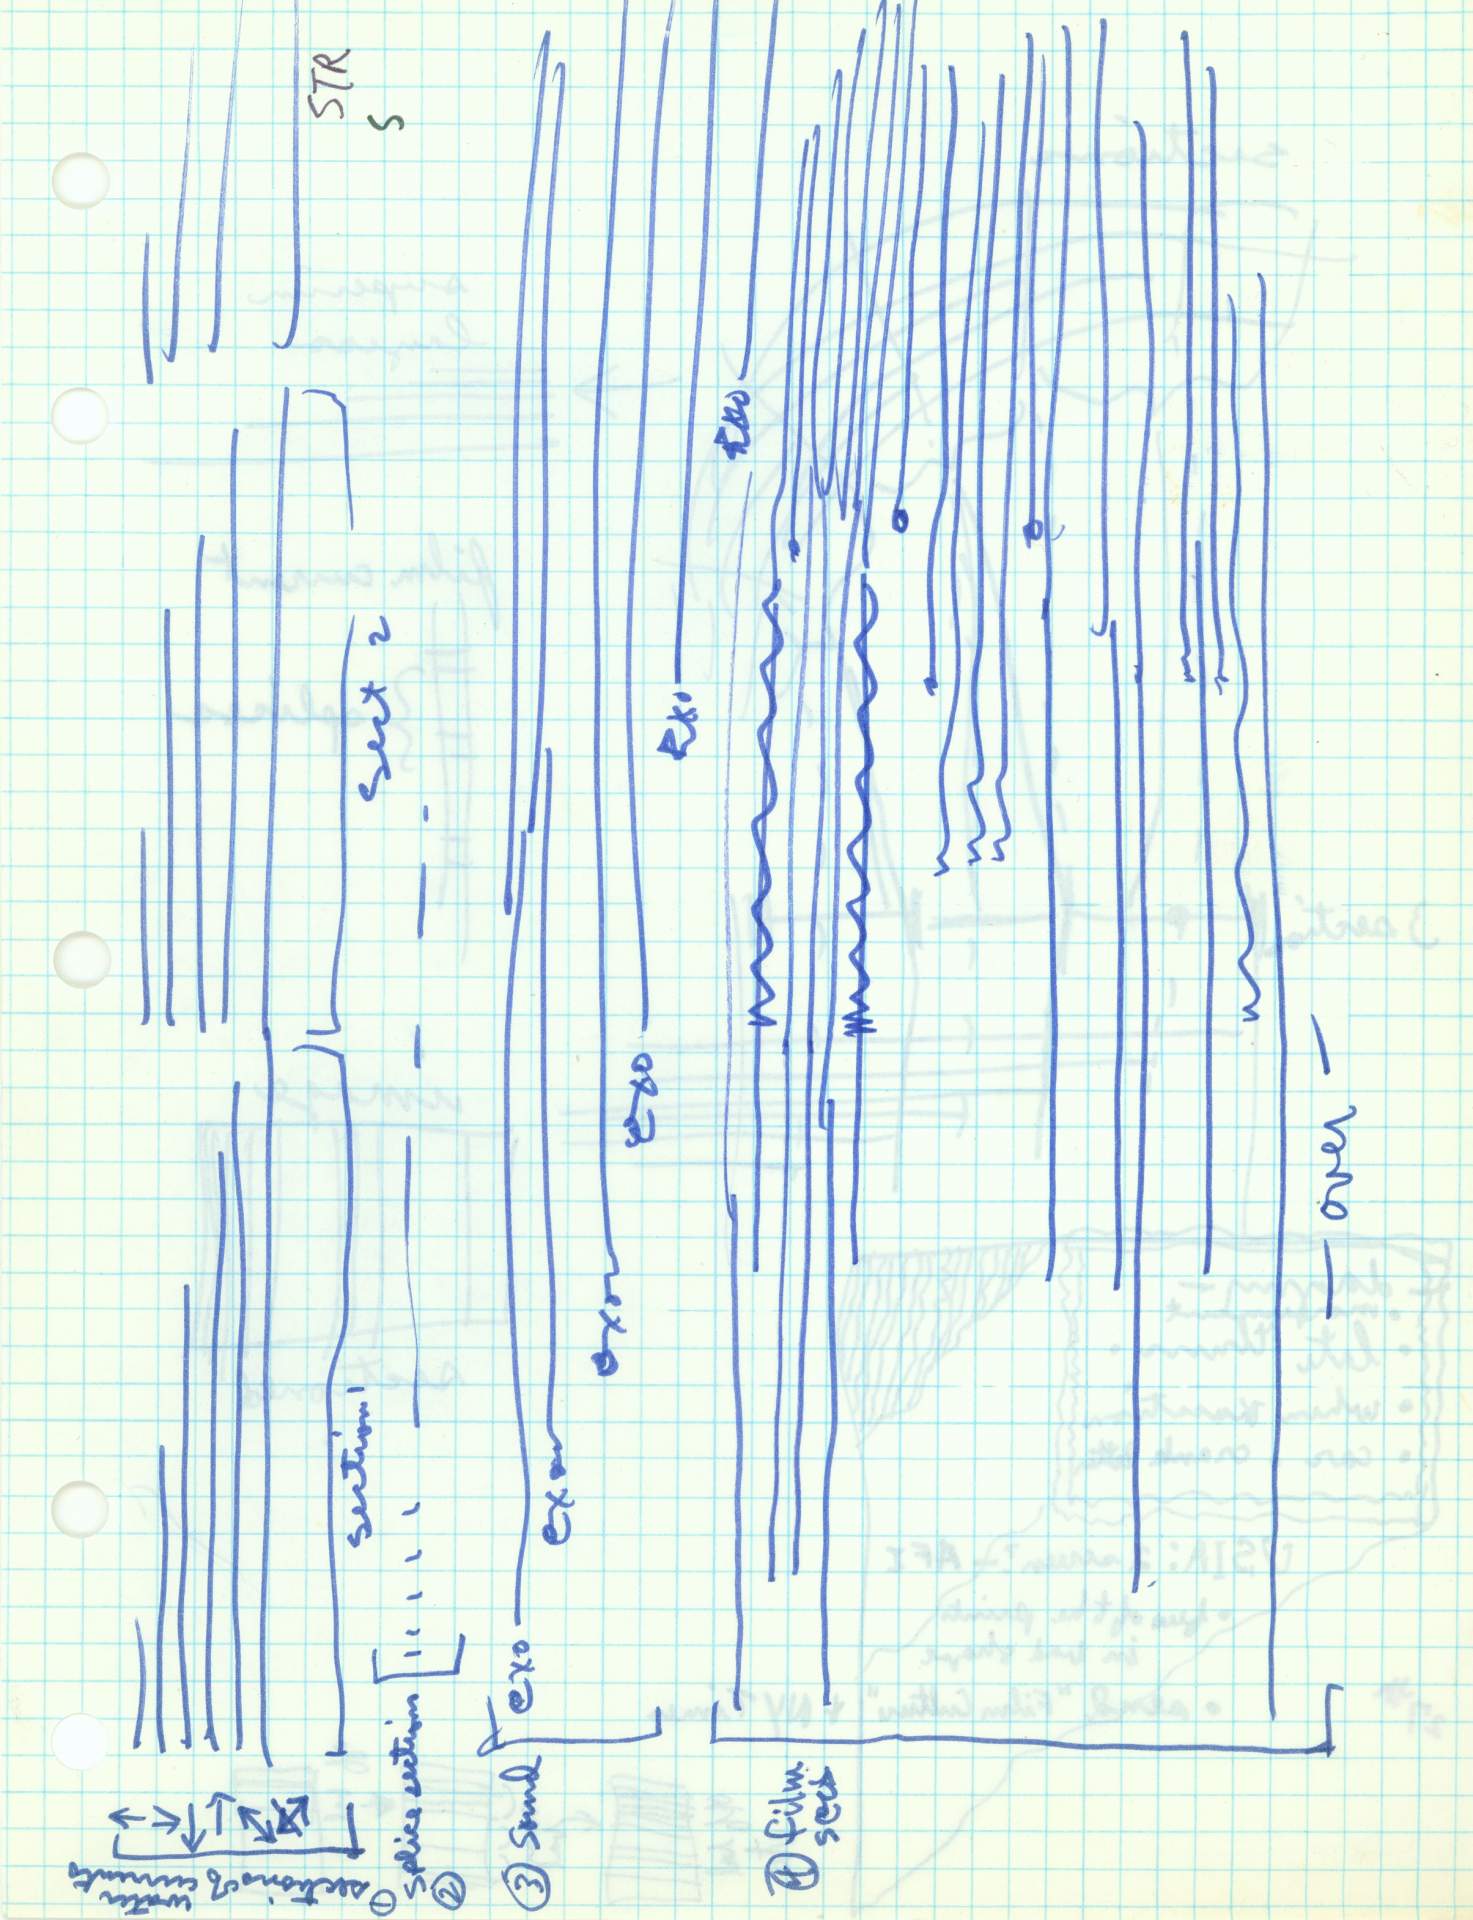 Untitled ( hand drawn graphs for film)